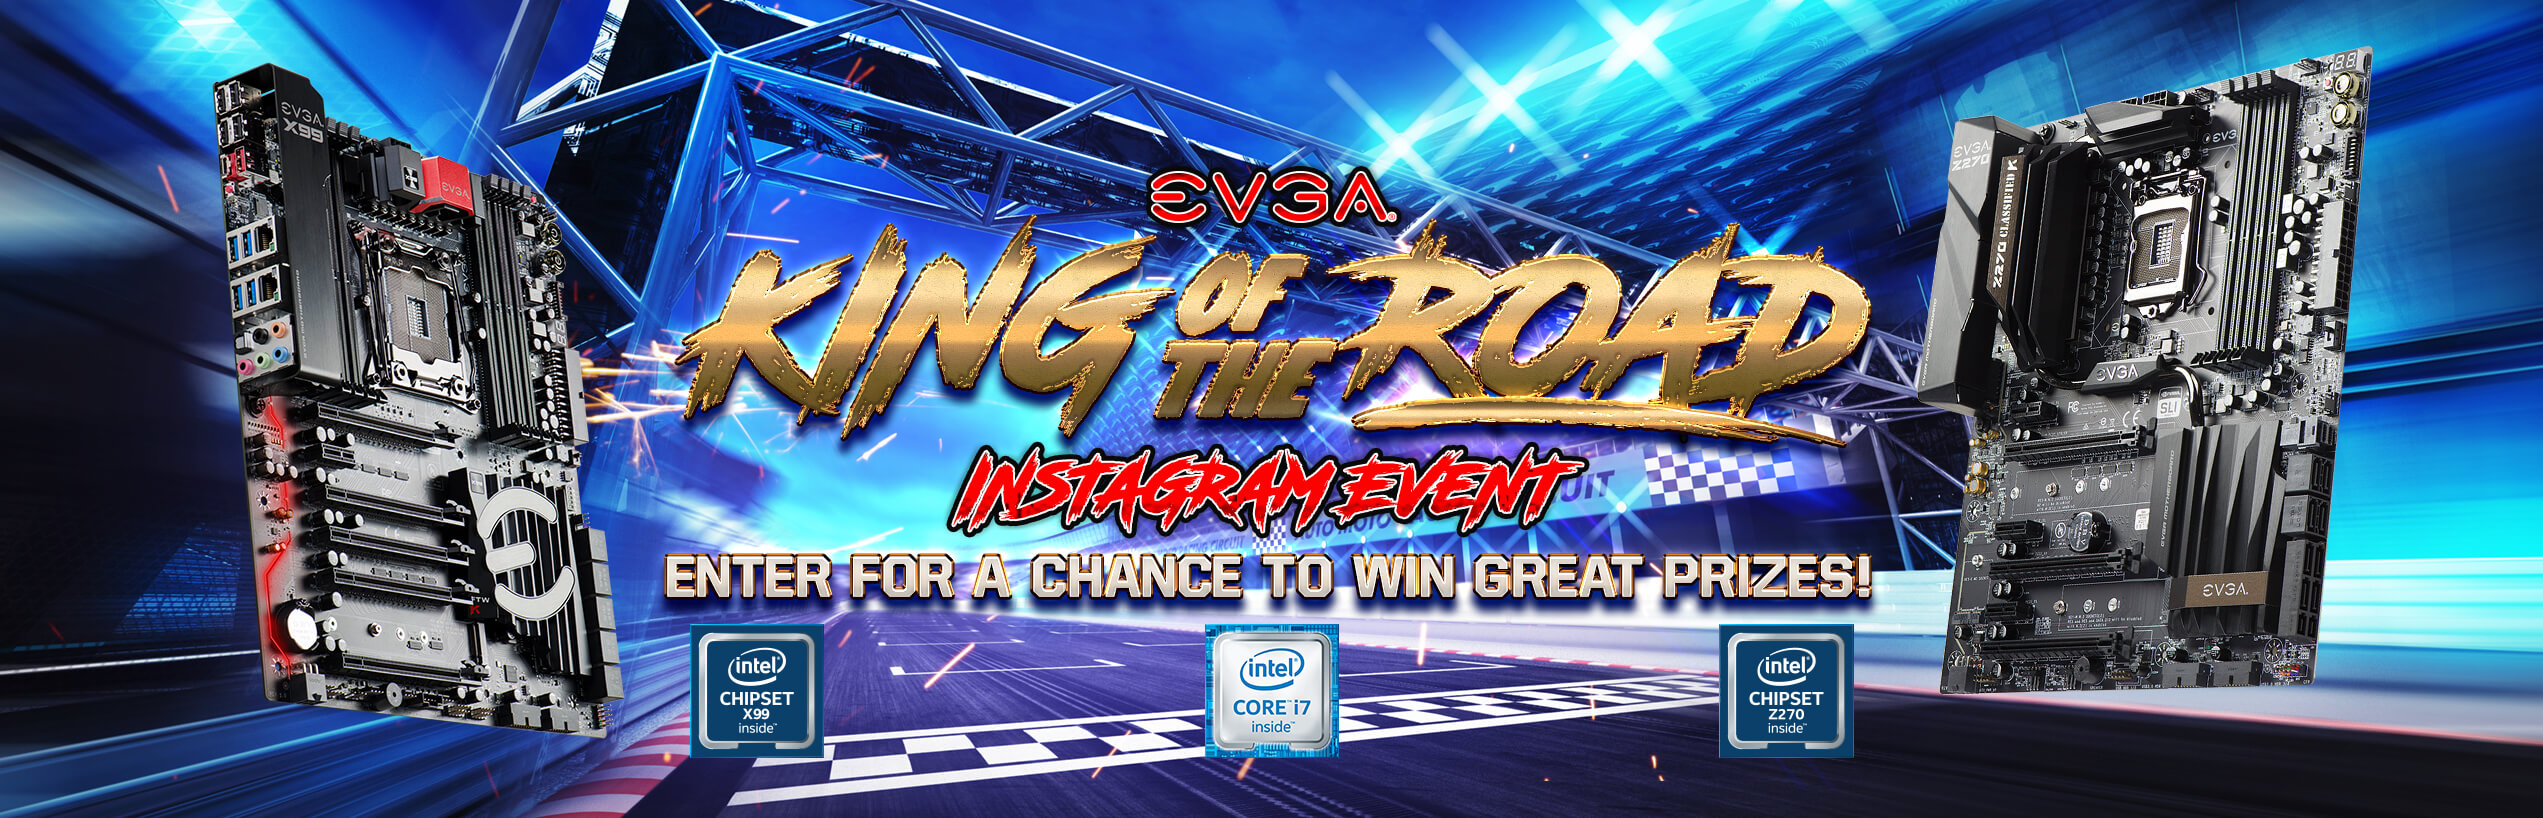 King Of The Road Instagram Event